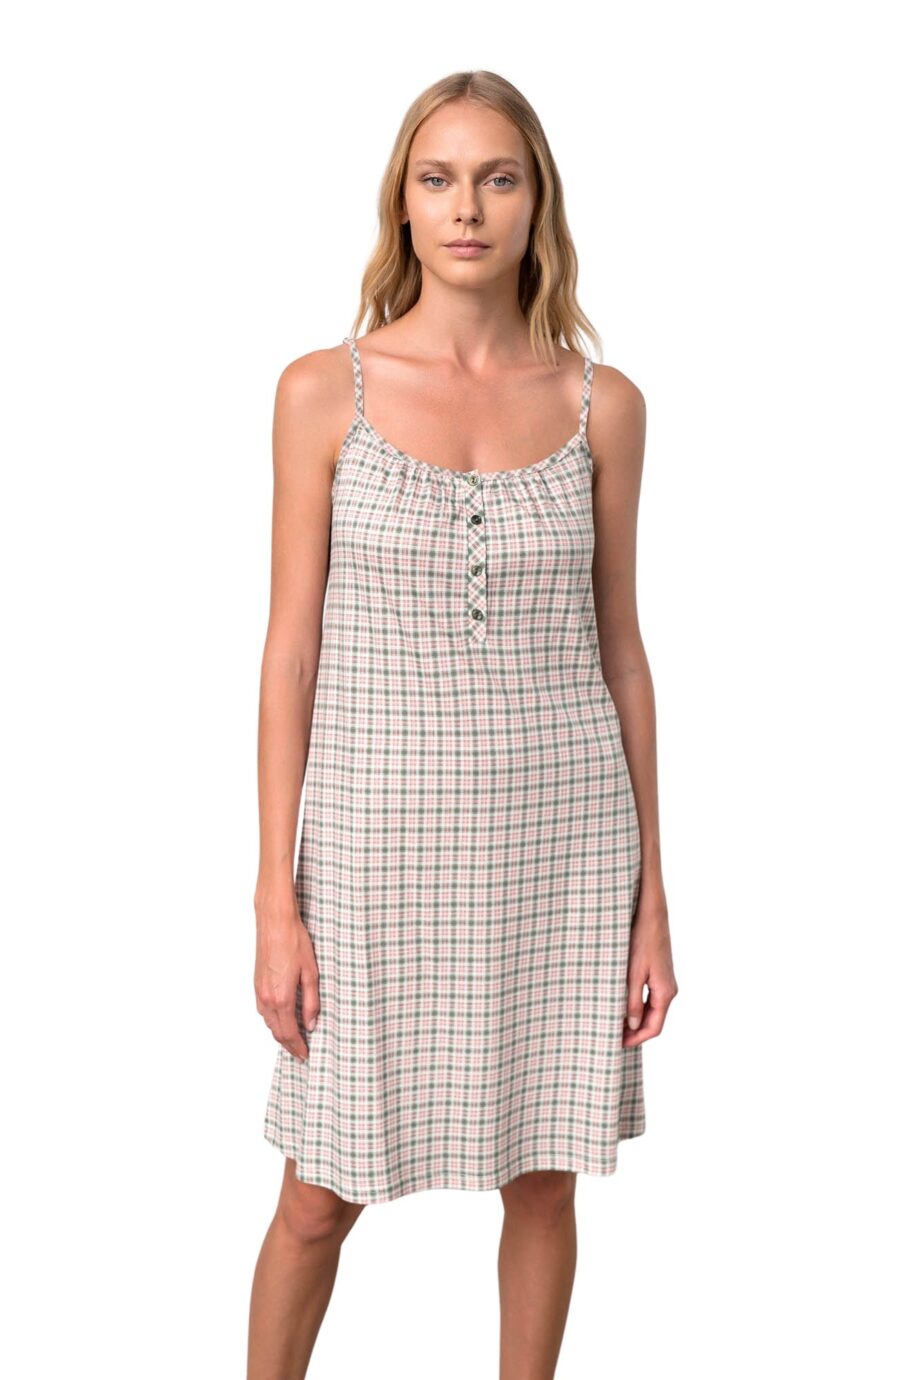 Nightgown with StrapsChecked nightgown with spaghetti straps and button placket in relaxed fit. A nice suggestion, you will enjoy all day long.